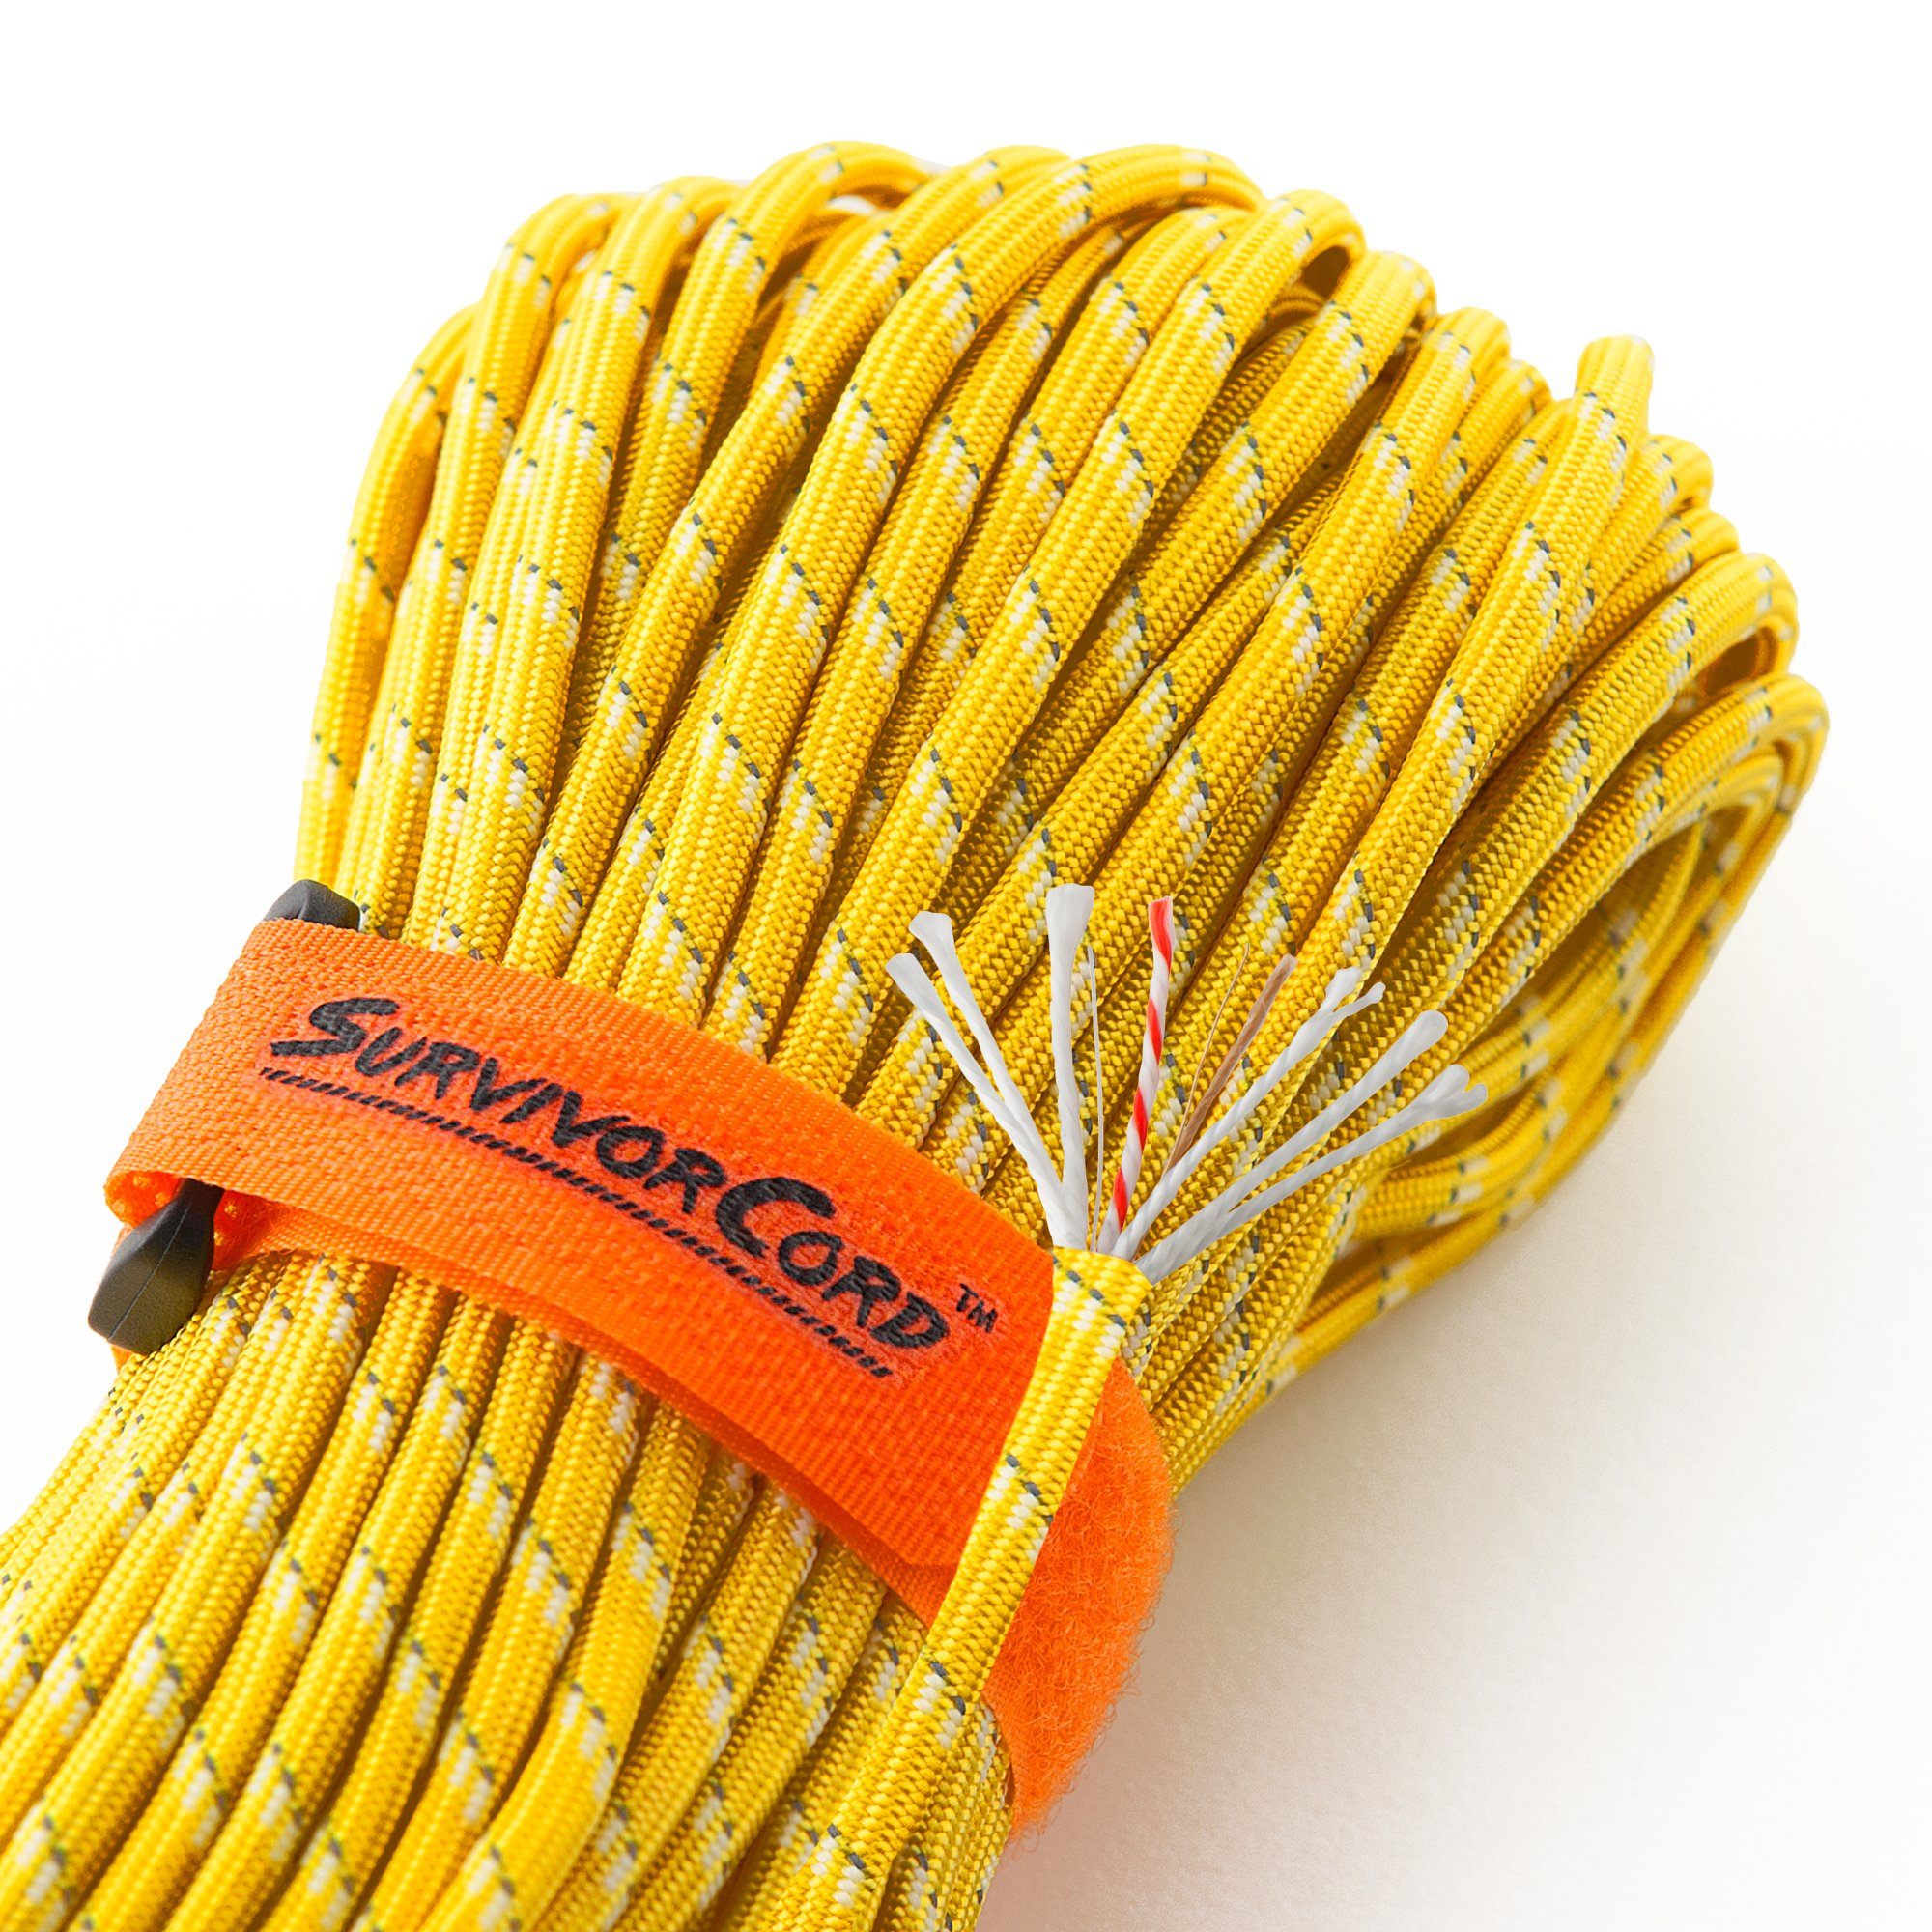  BORED? PARACORD! 95 Cord - Neon Yellow - Type 1 Cord - 100 Feet  on Plastic Winder Brand : Sports & Outdoors